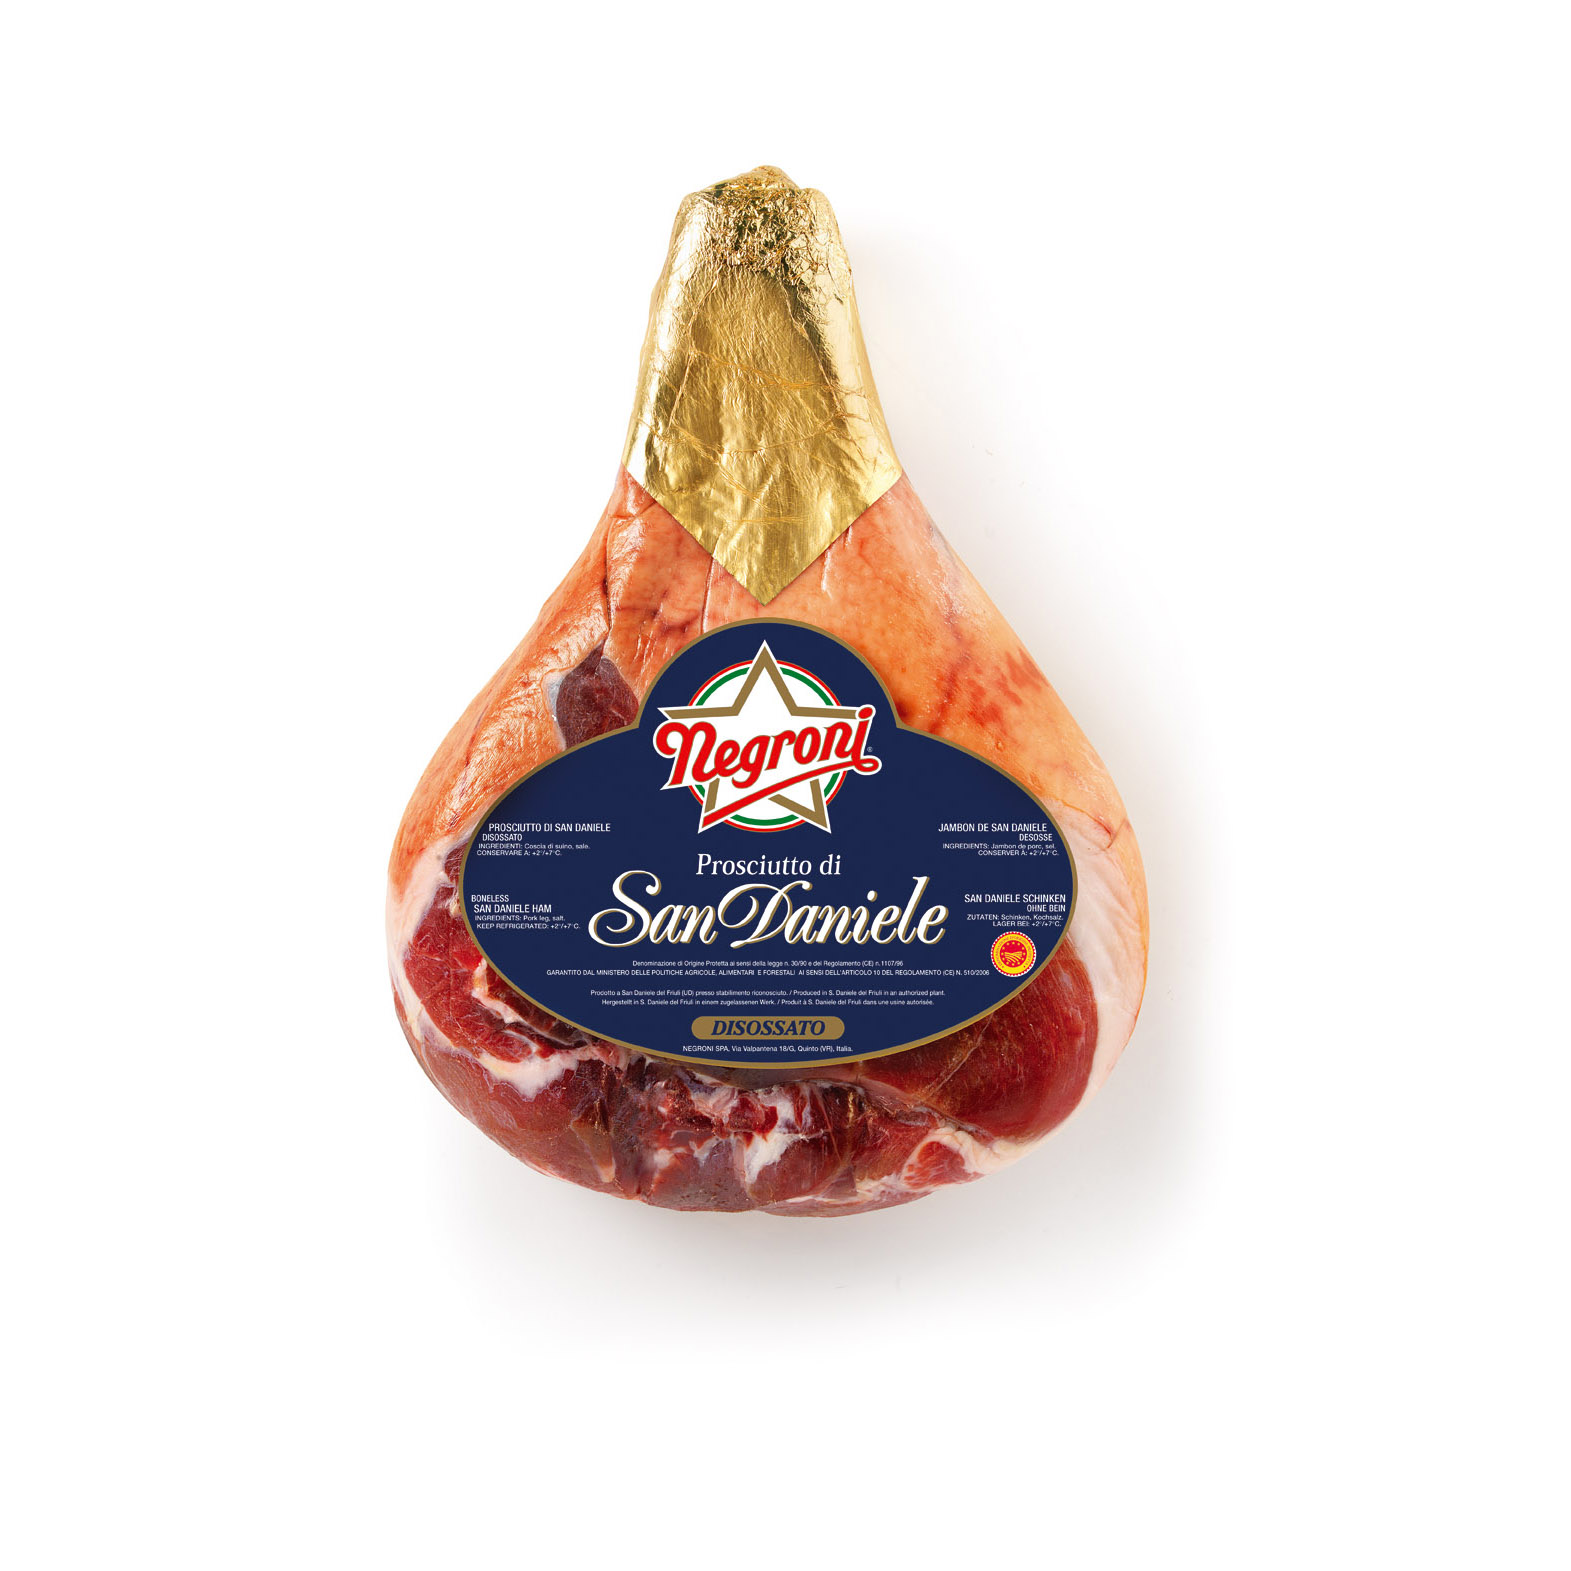 Parma Ham P.D.O. Deboned 100% Italy Negroni Instant food Processed Meat Dry Cured Ham